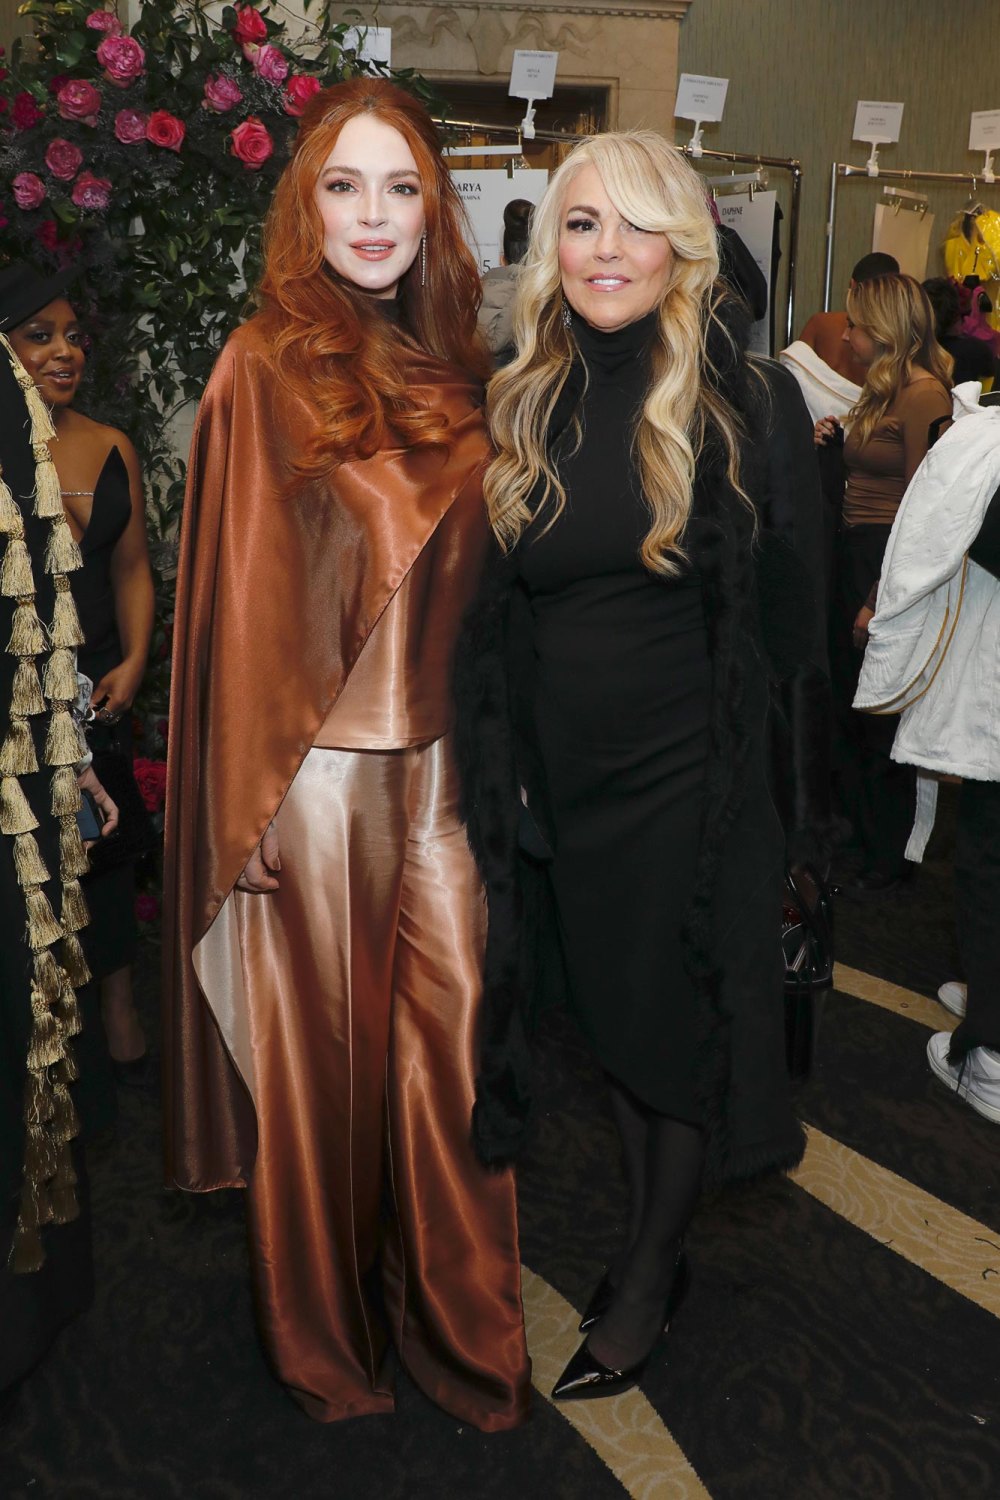 Dina Lohan Is Overjoyed After Daughter Lindsay Lohan Welcomes 1st Baby With Bader Shammas 274